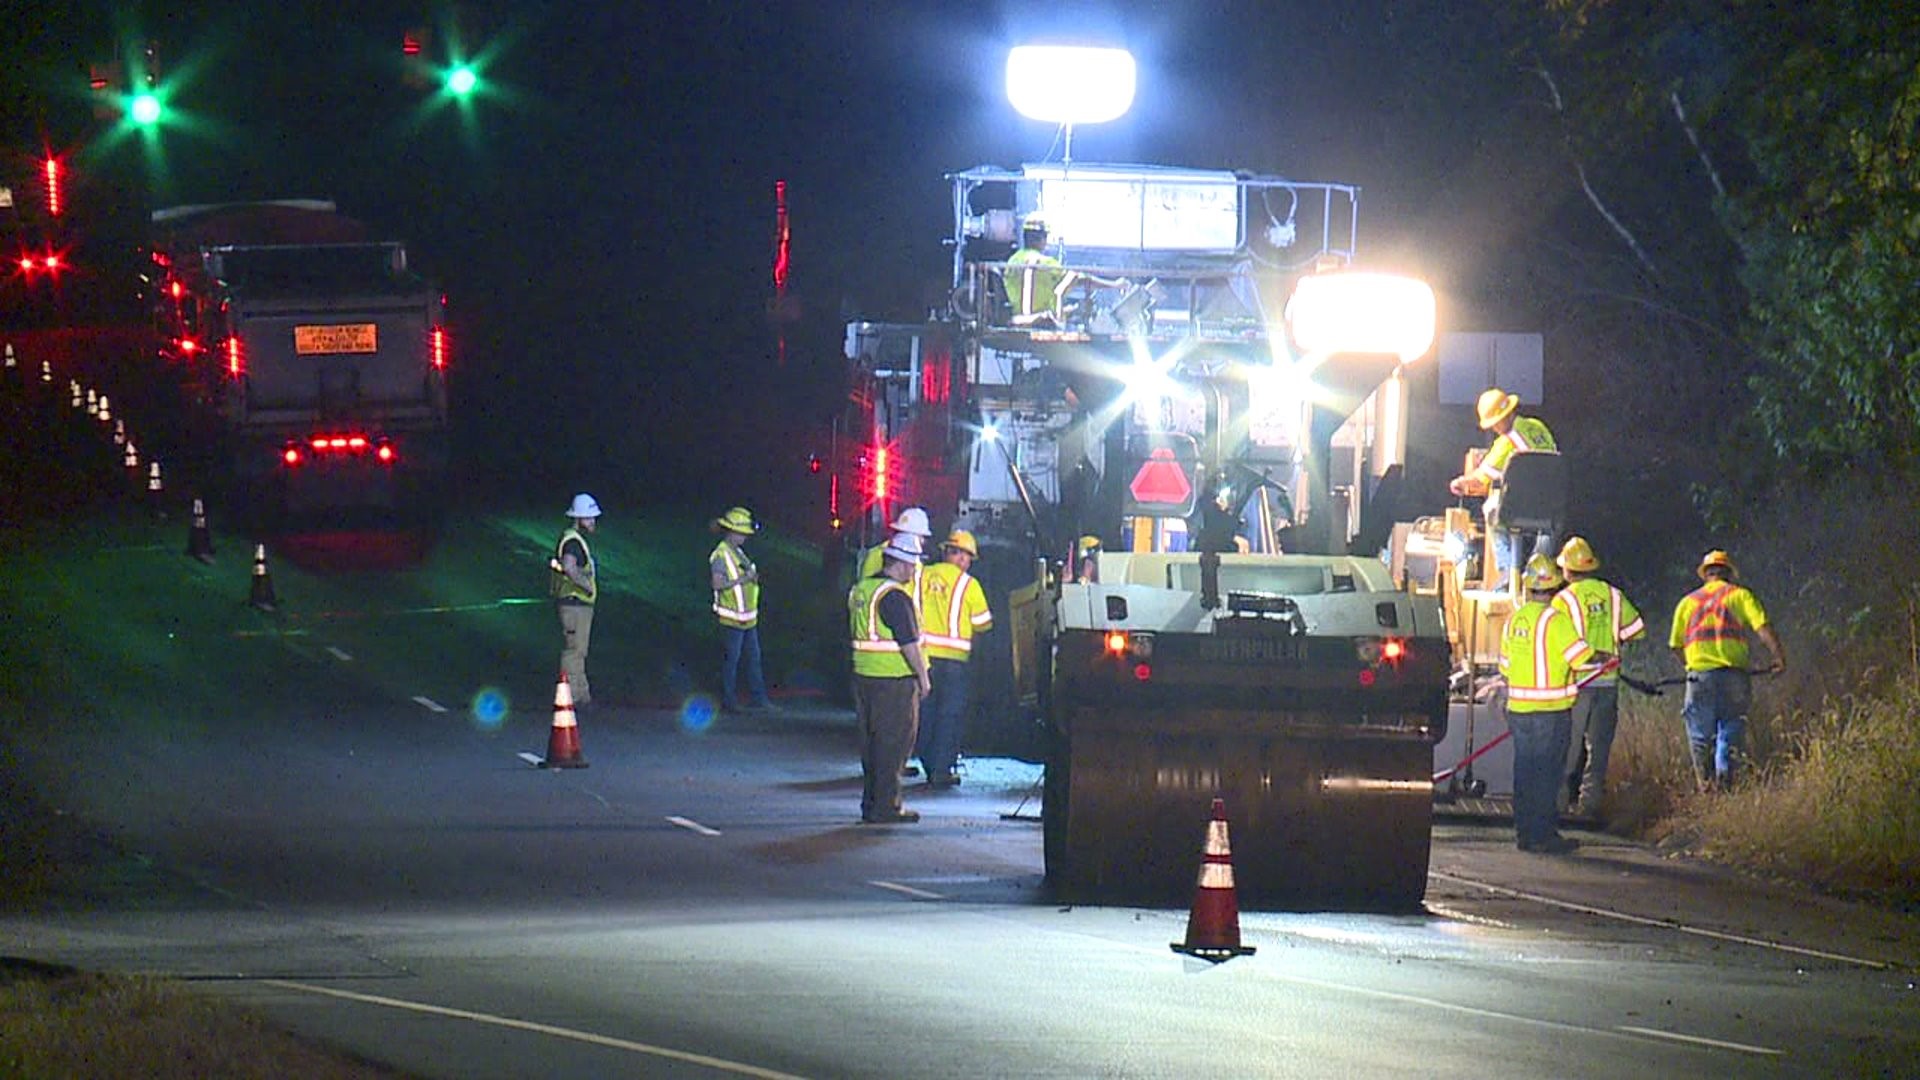 Paving Project Near Completion in Luzerne County